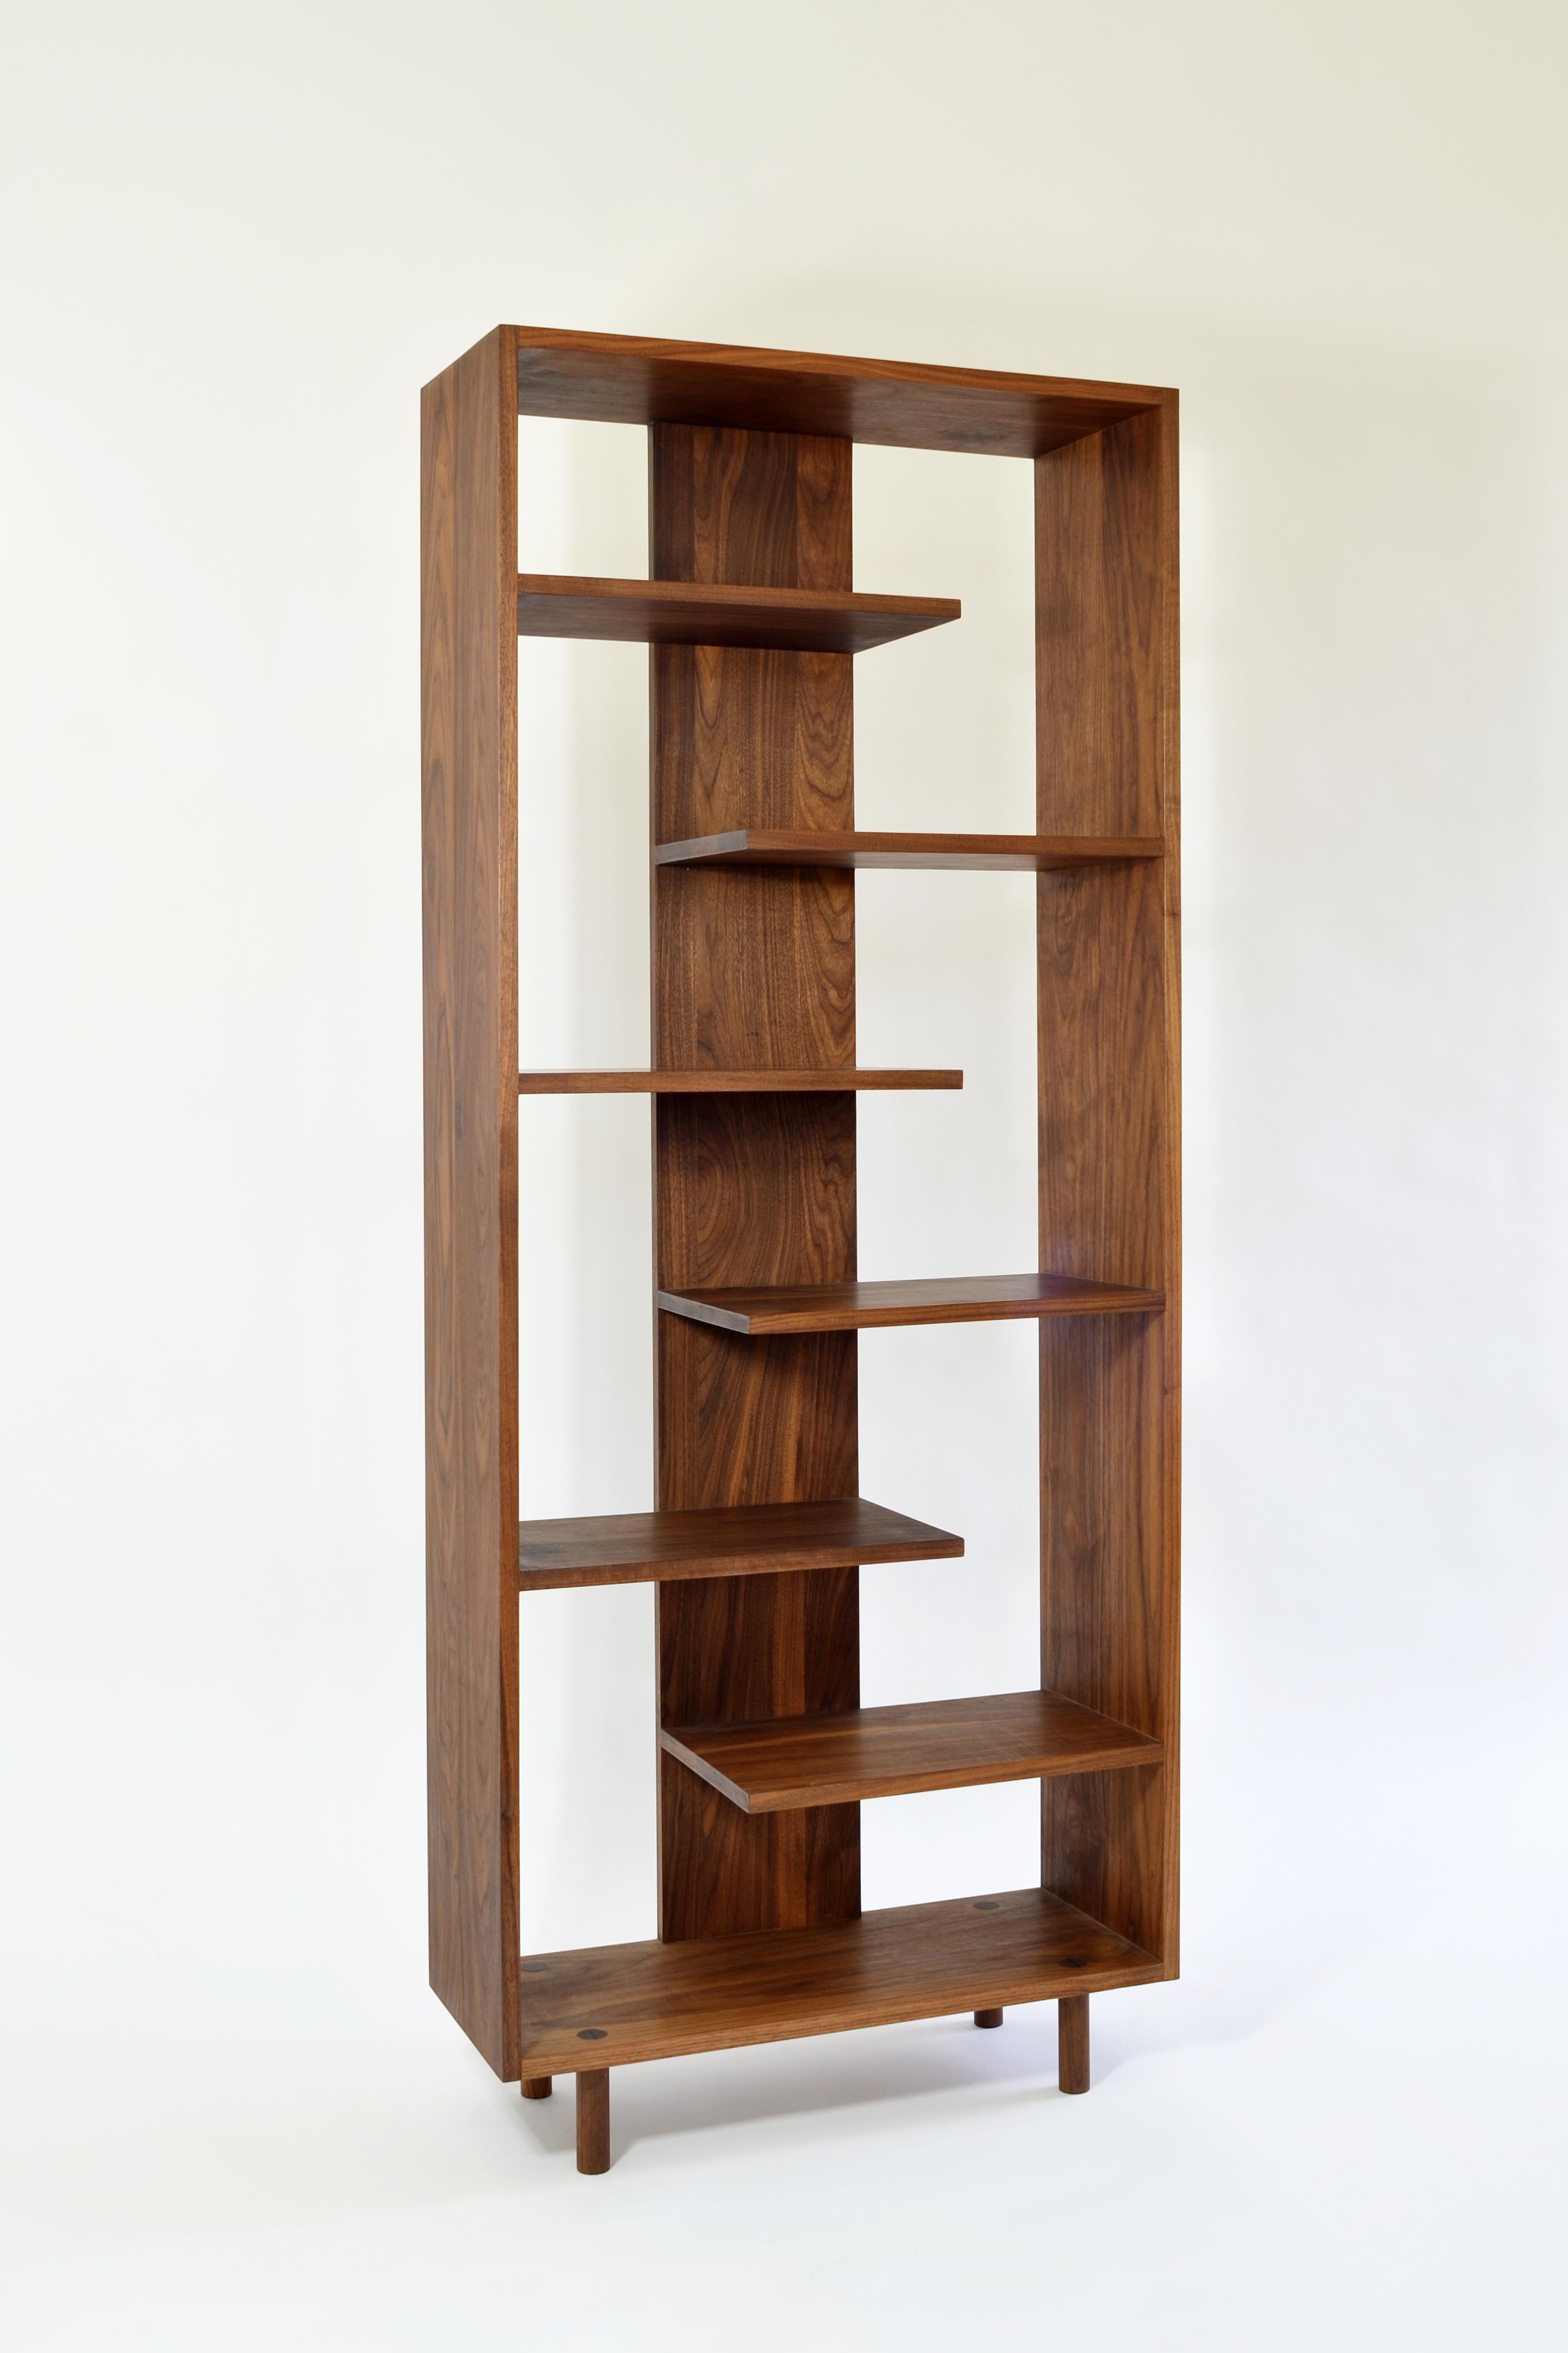 Paso shelving was designed to embody simplicity and harmony through the use of rhythmical geometries and warm natural materials. Alternating ladder-like shelves create discrete sections which are ideal for displaying favorite books and objects. This